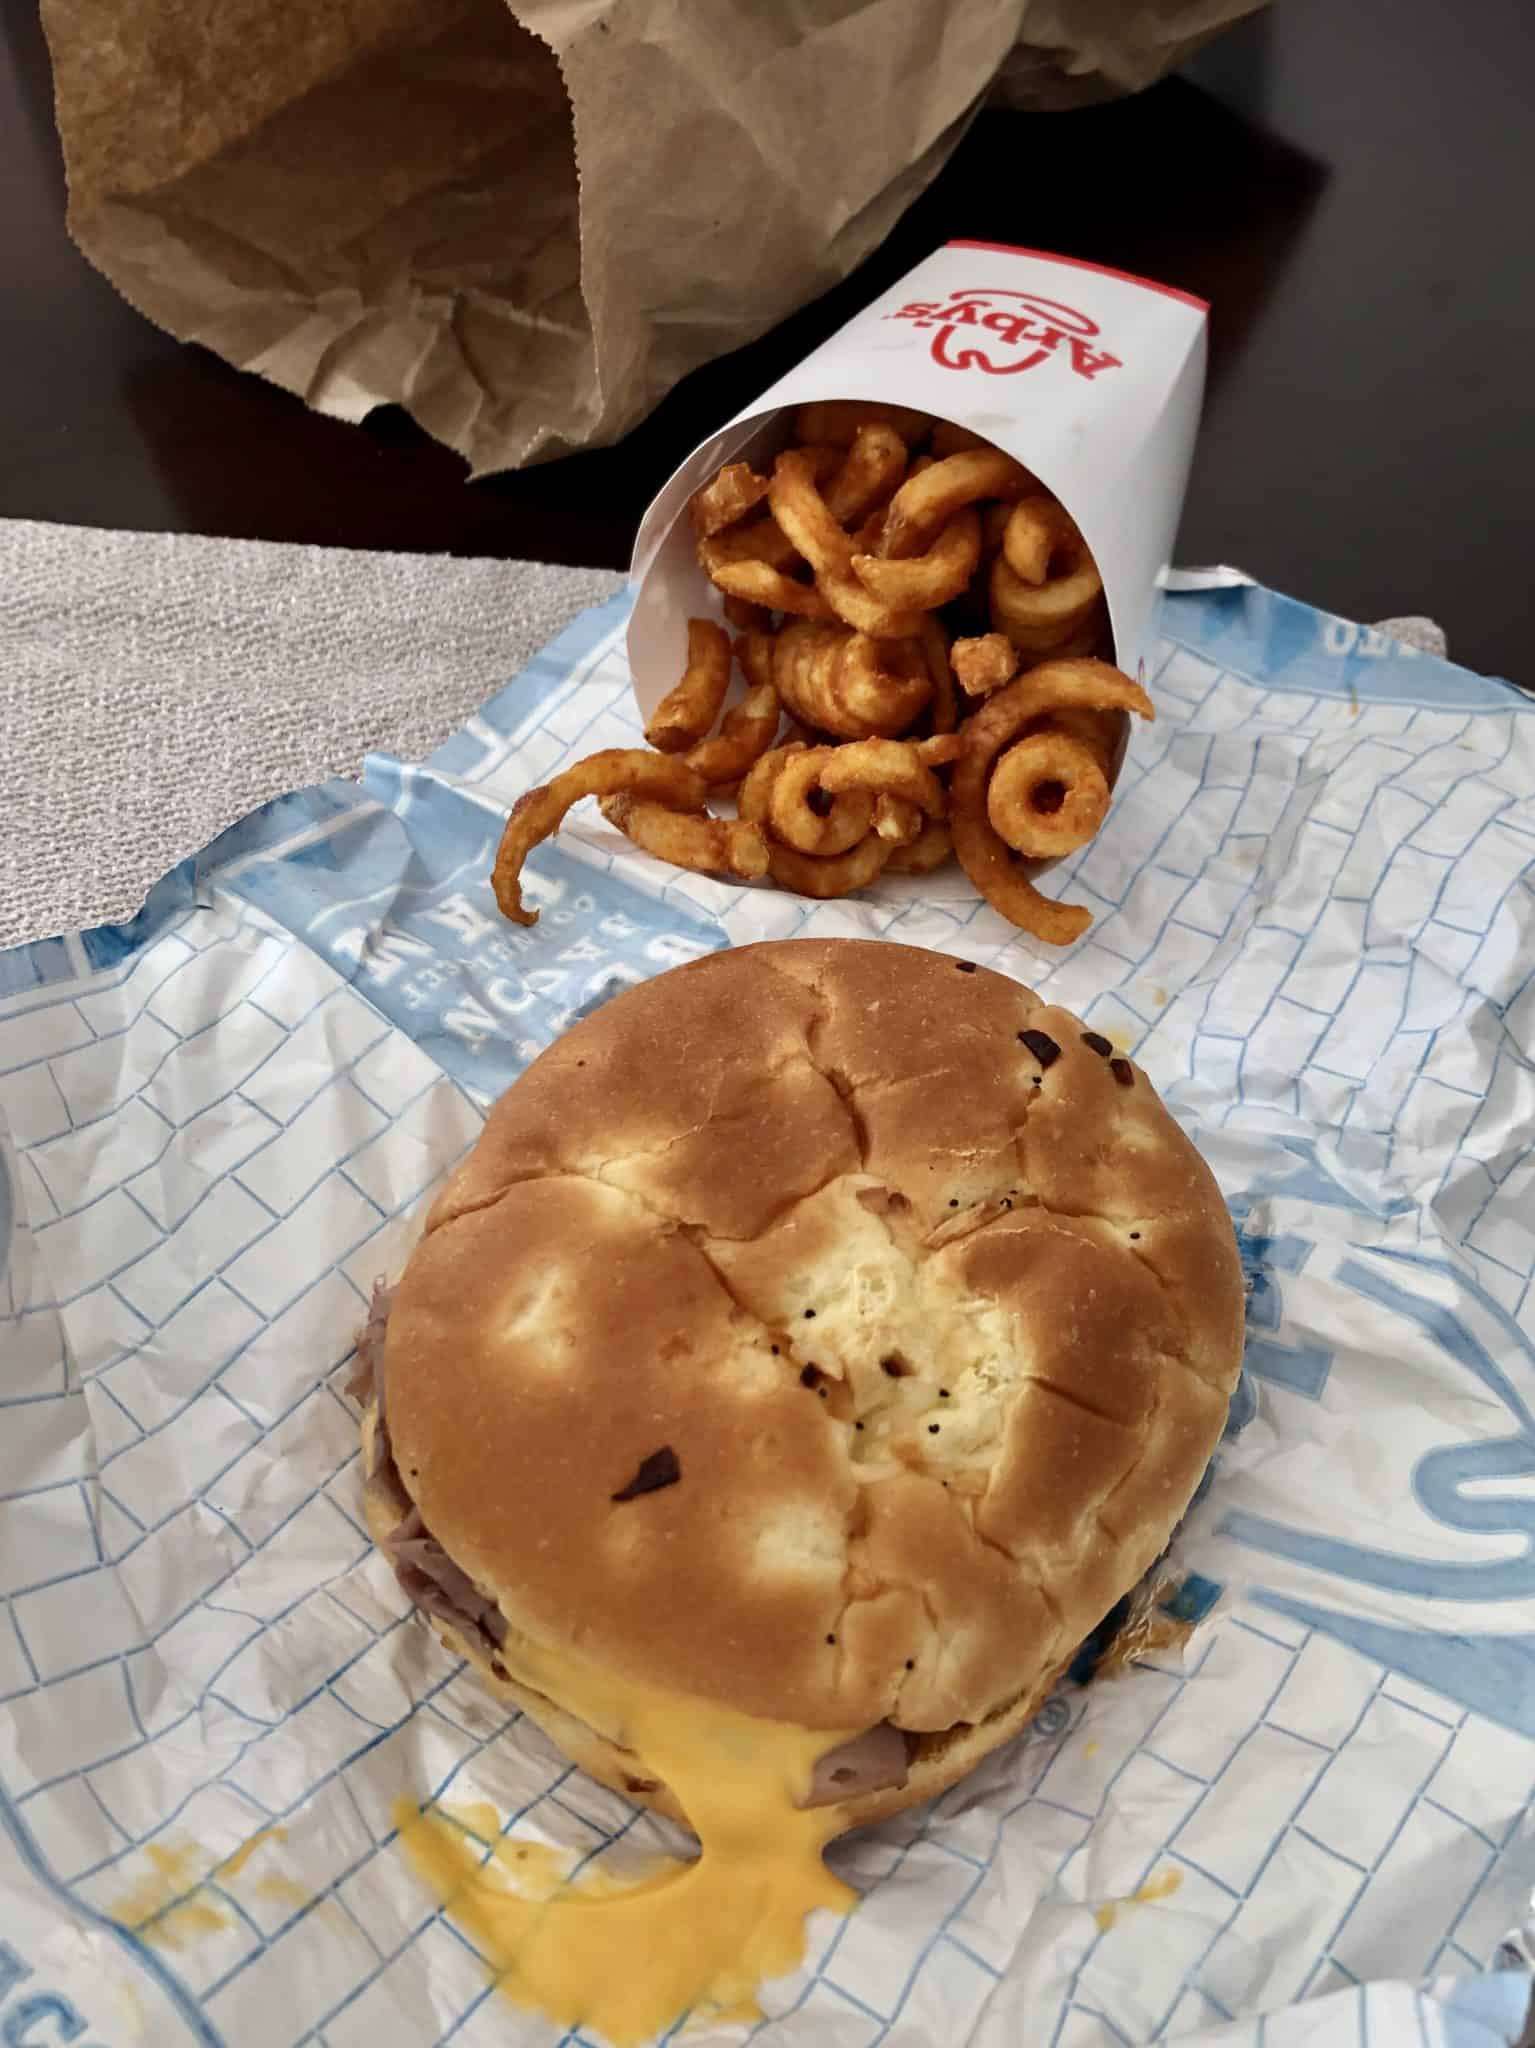 Arby's beef and cheddar with curly fries in background